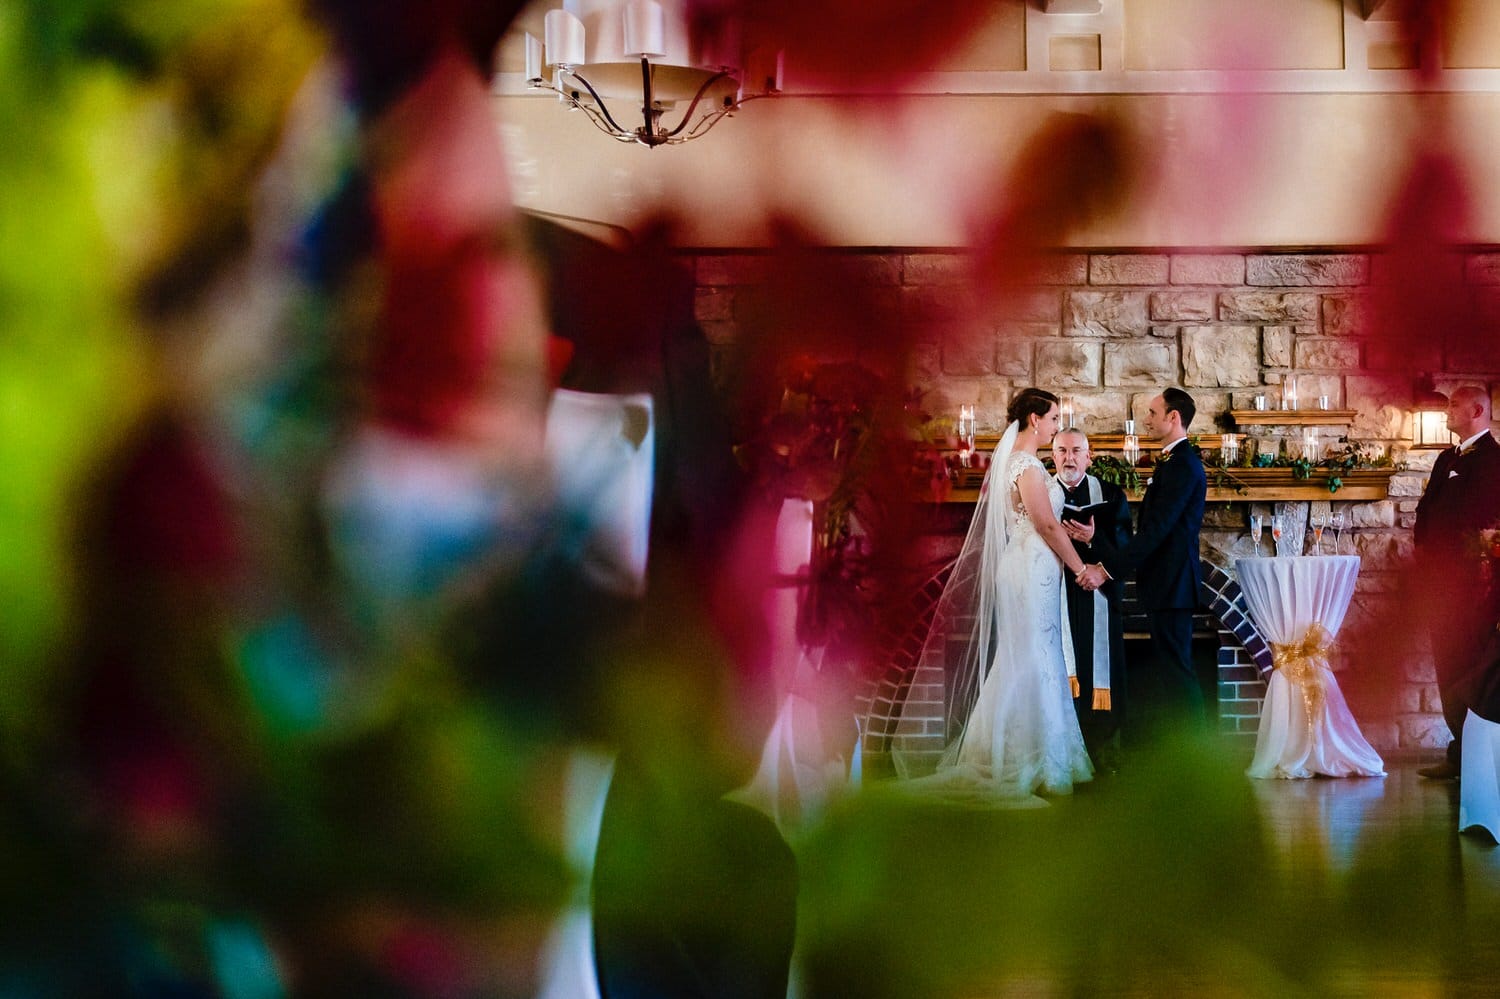 A picture of a bride and groom holding hands, exchanging vows, taken through a red floral arrangement during a winter wedding ceremony at The Elms. 